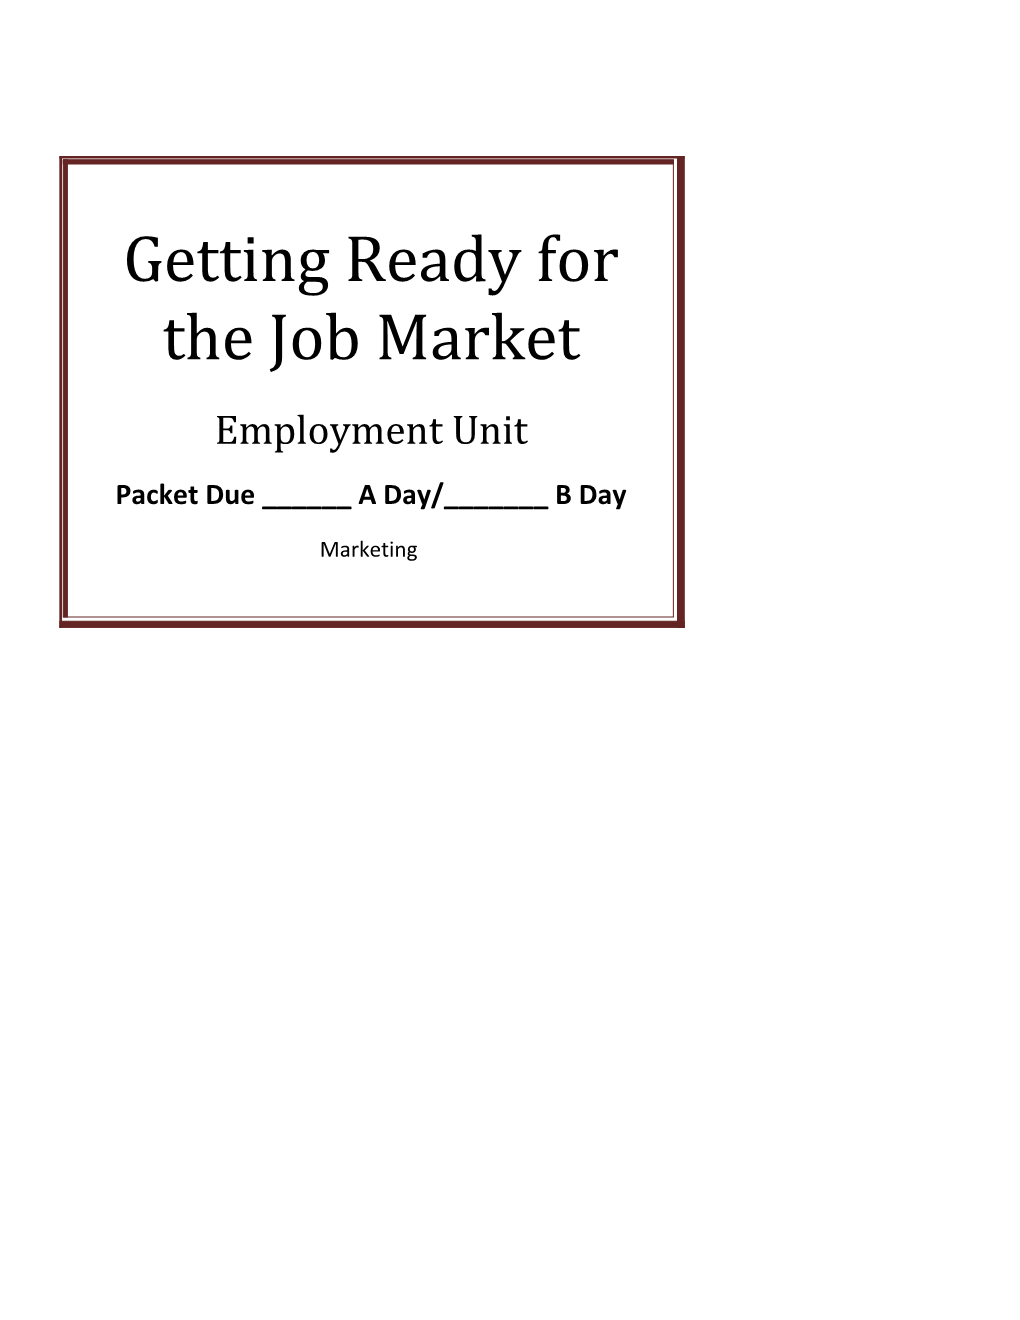 Getting Ready For The Job Market